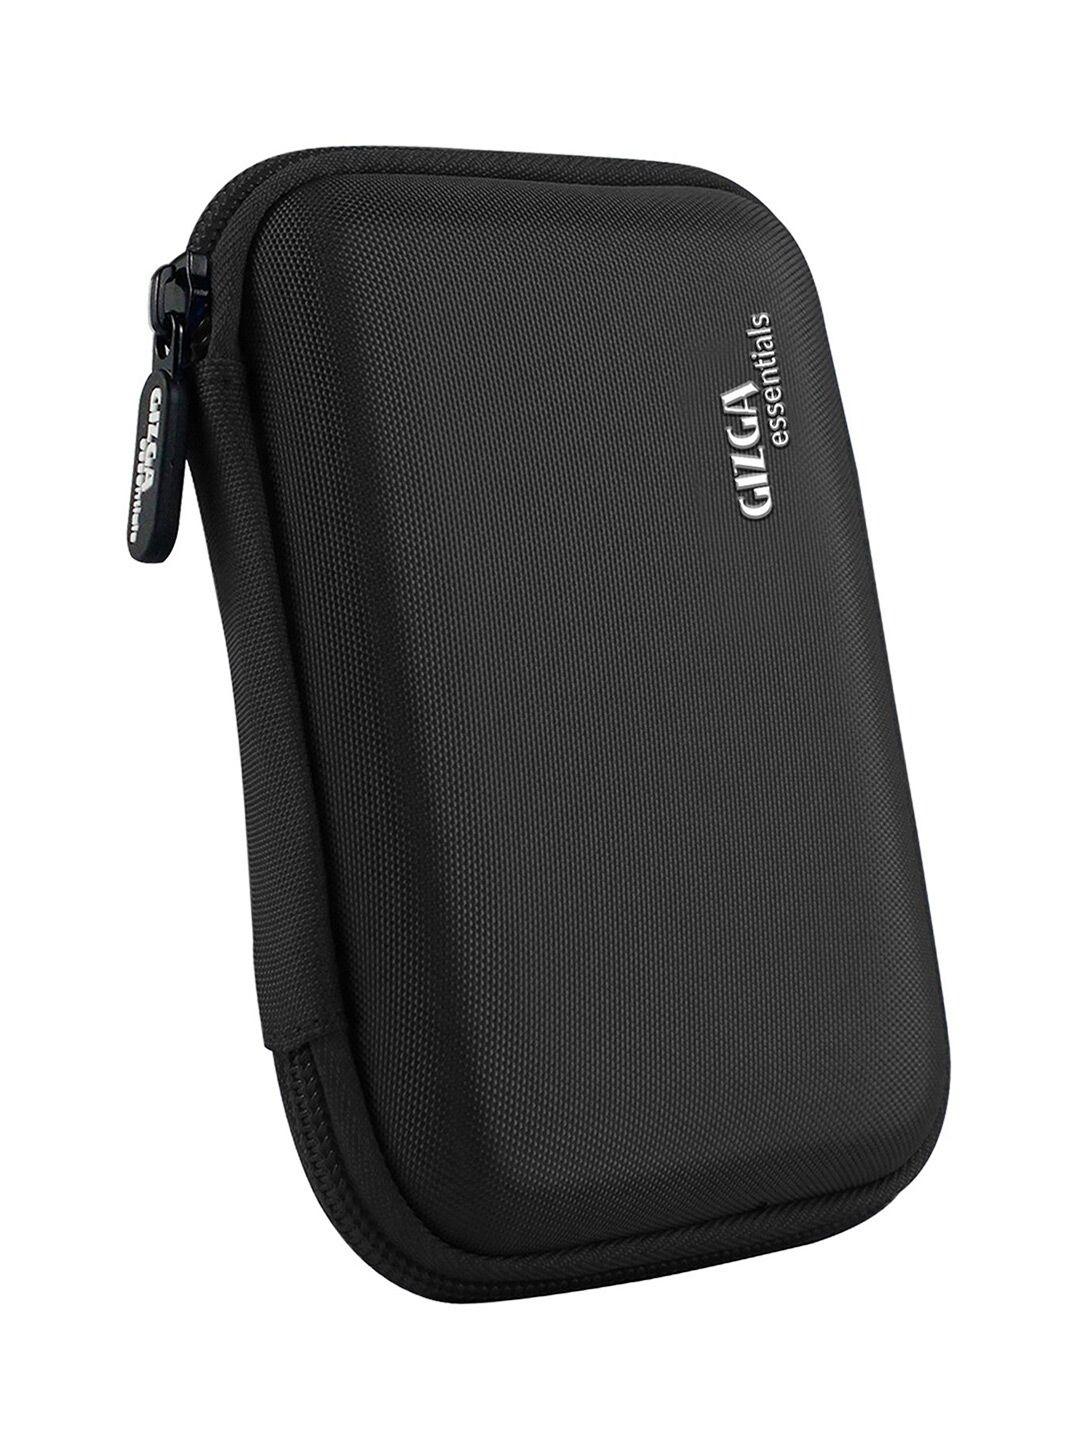 gizga-essentials-hard-disk-drive-case-double-padded-laptop-bag